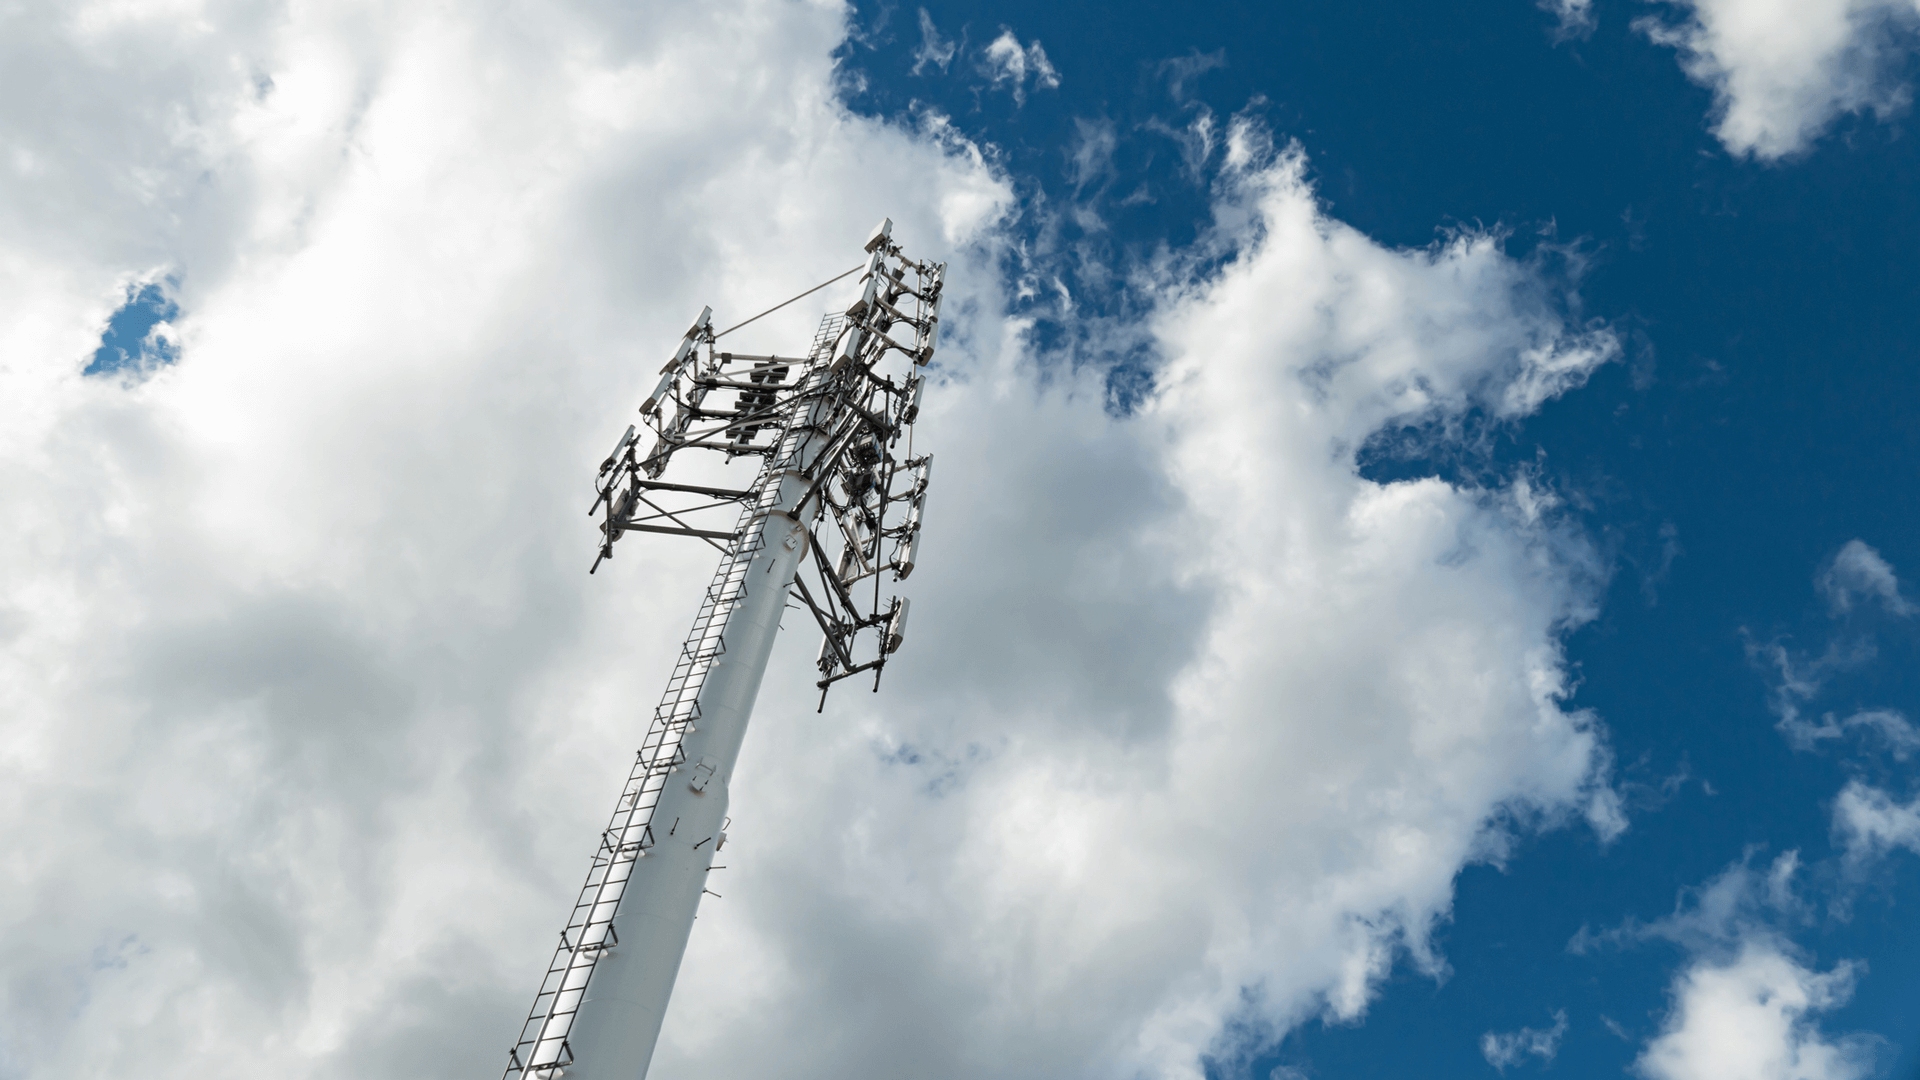 worm's eye view of a cellphone tower and a blue sky with clouds